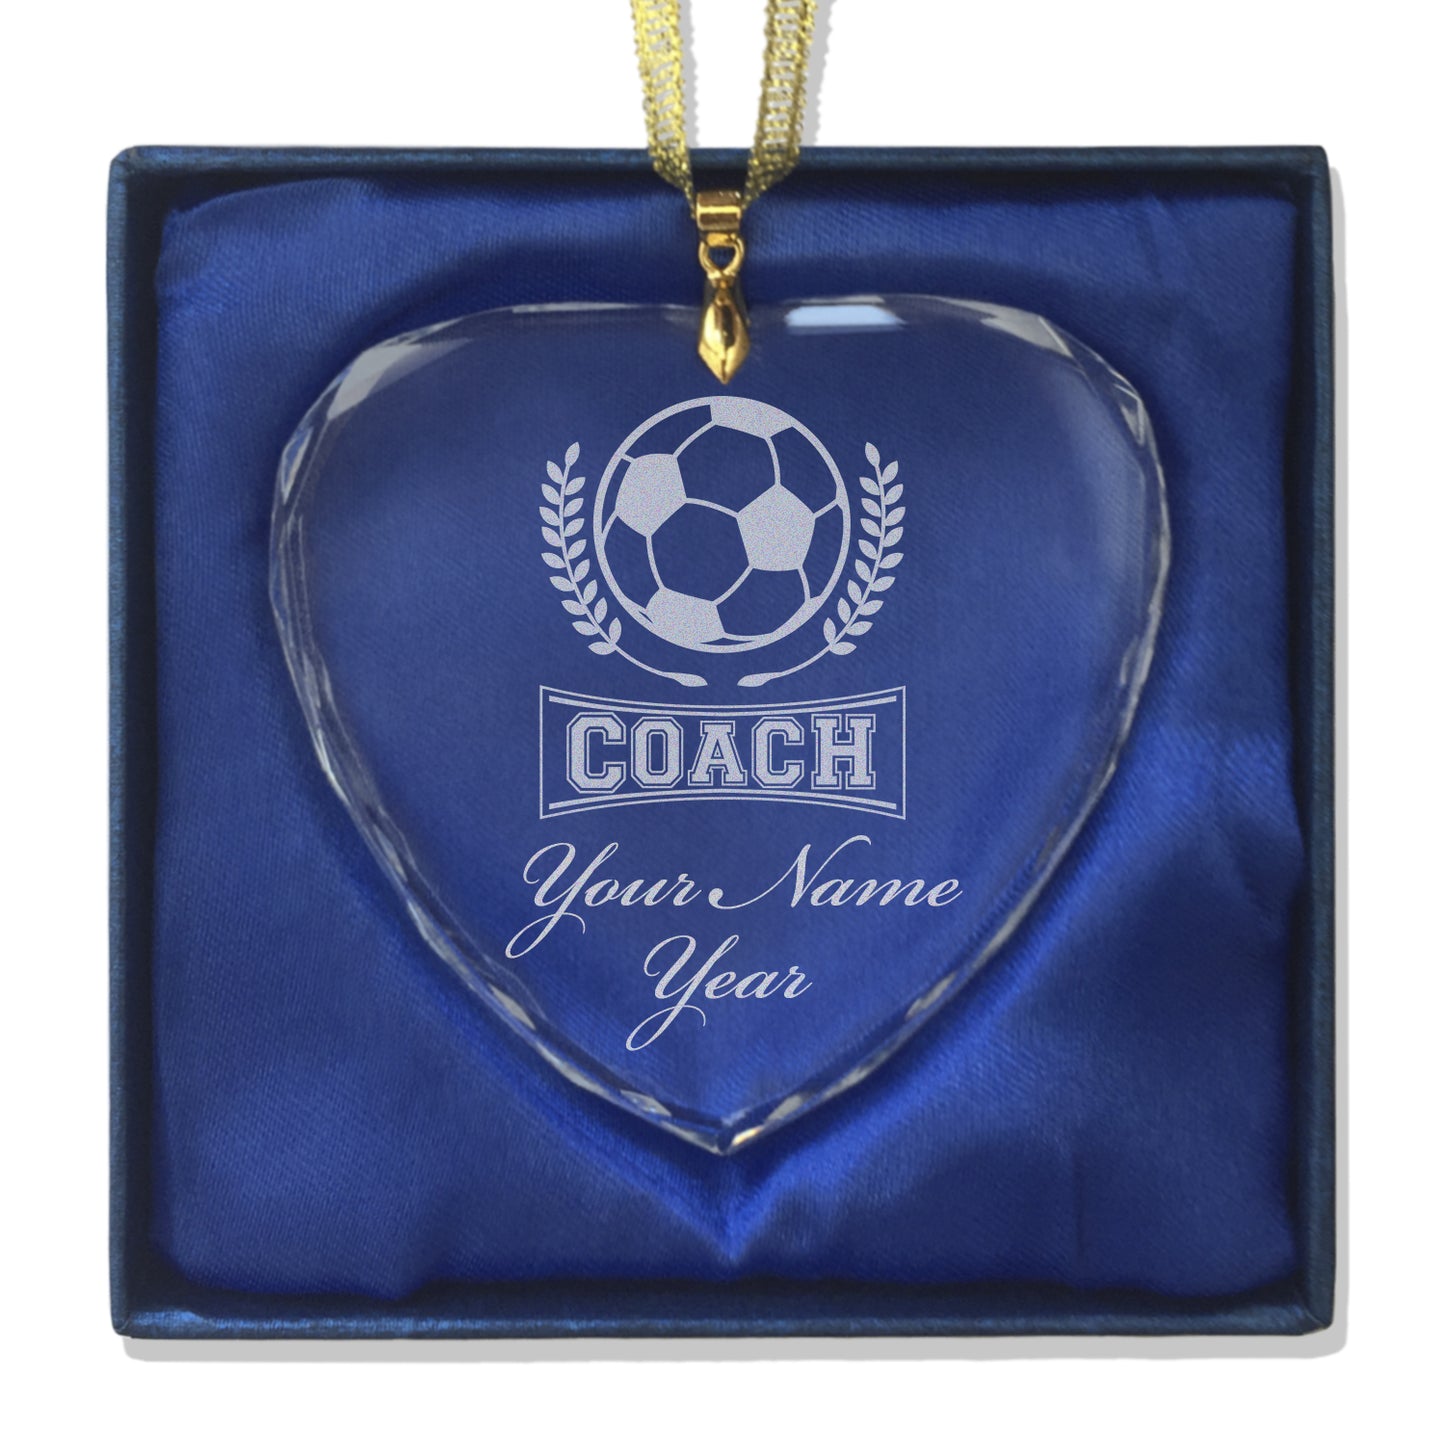 LaserGram Christmas Ornament, Soccer Coach, Personalized Engraving Included (Heart Shape)